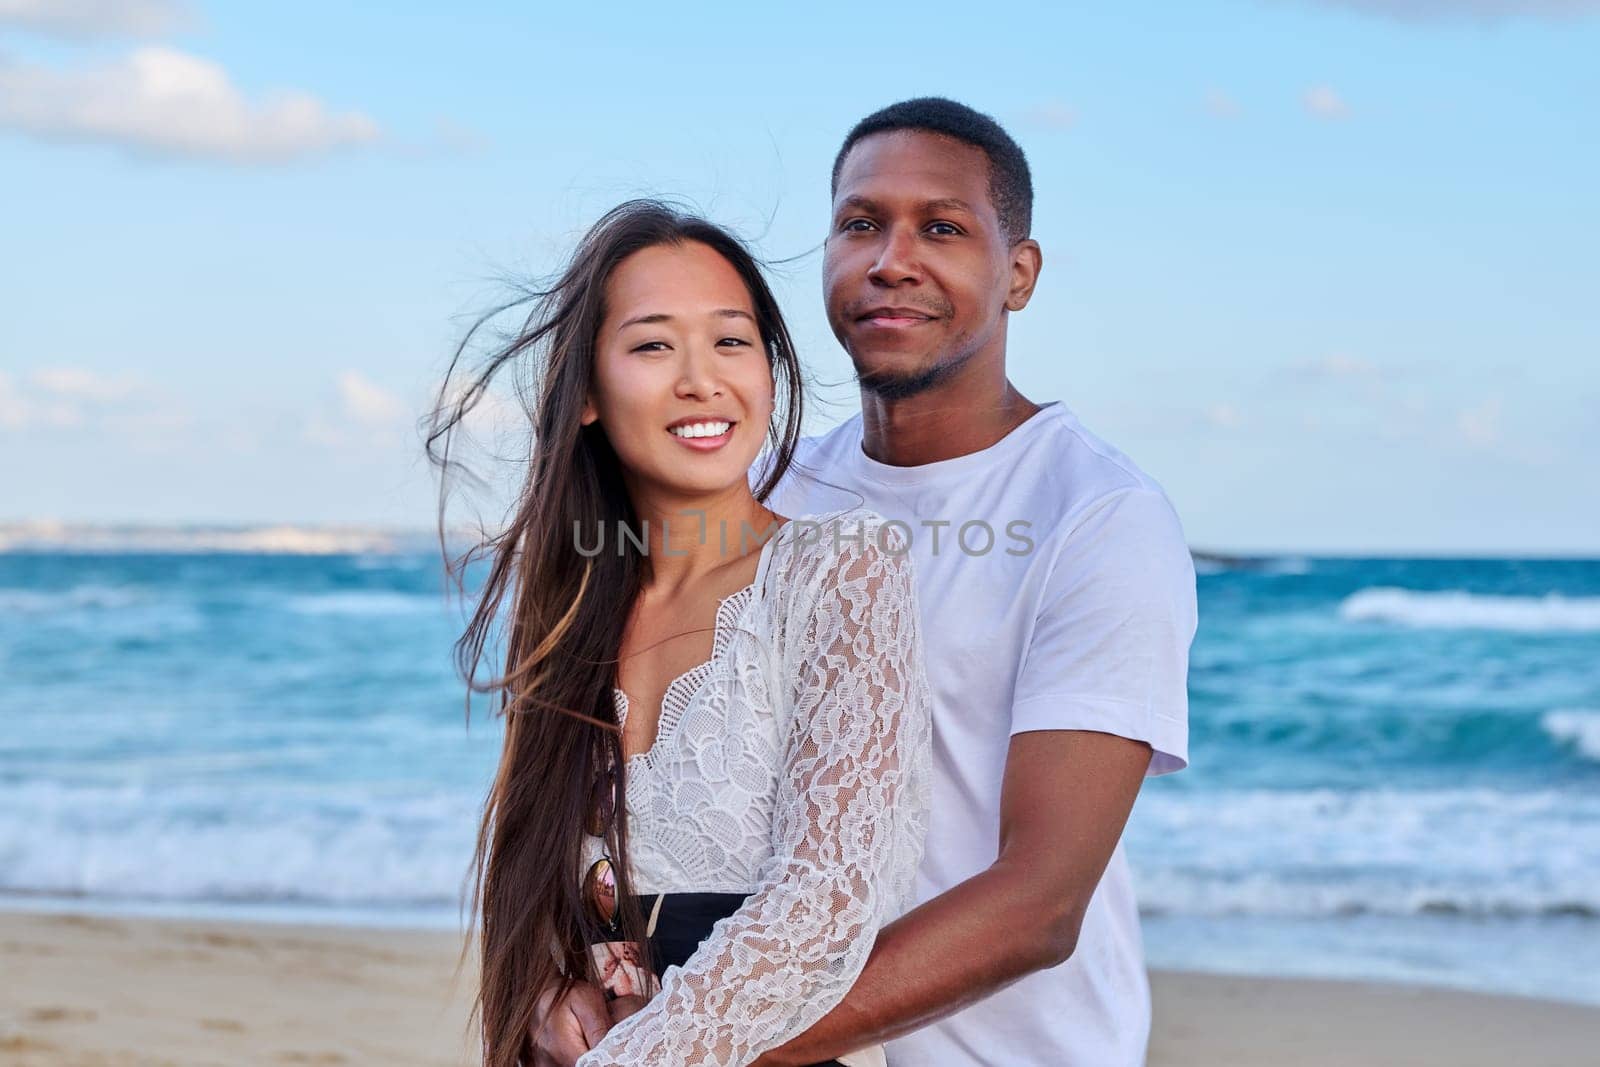 Beautiful young couple in love on beach. Portrait of Asian woman and African American man embracing. Multicultural, multiethnic family, relationships, togetherness, lifestyle, sea nature vacation